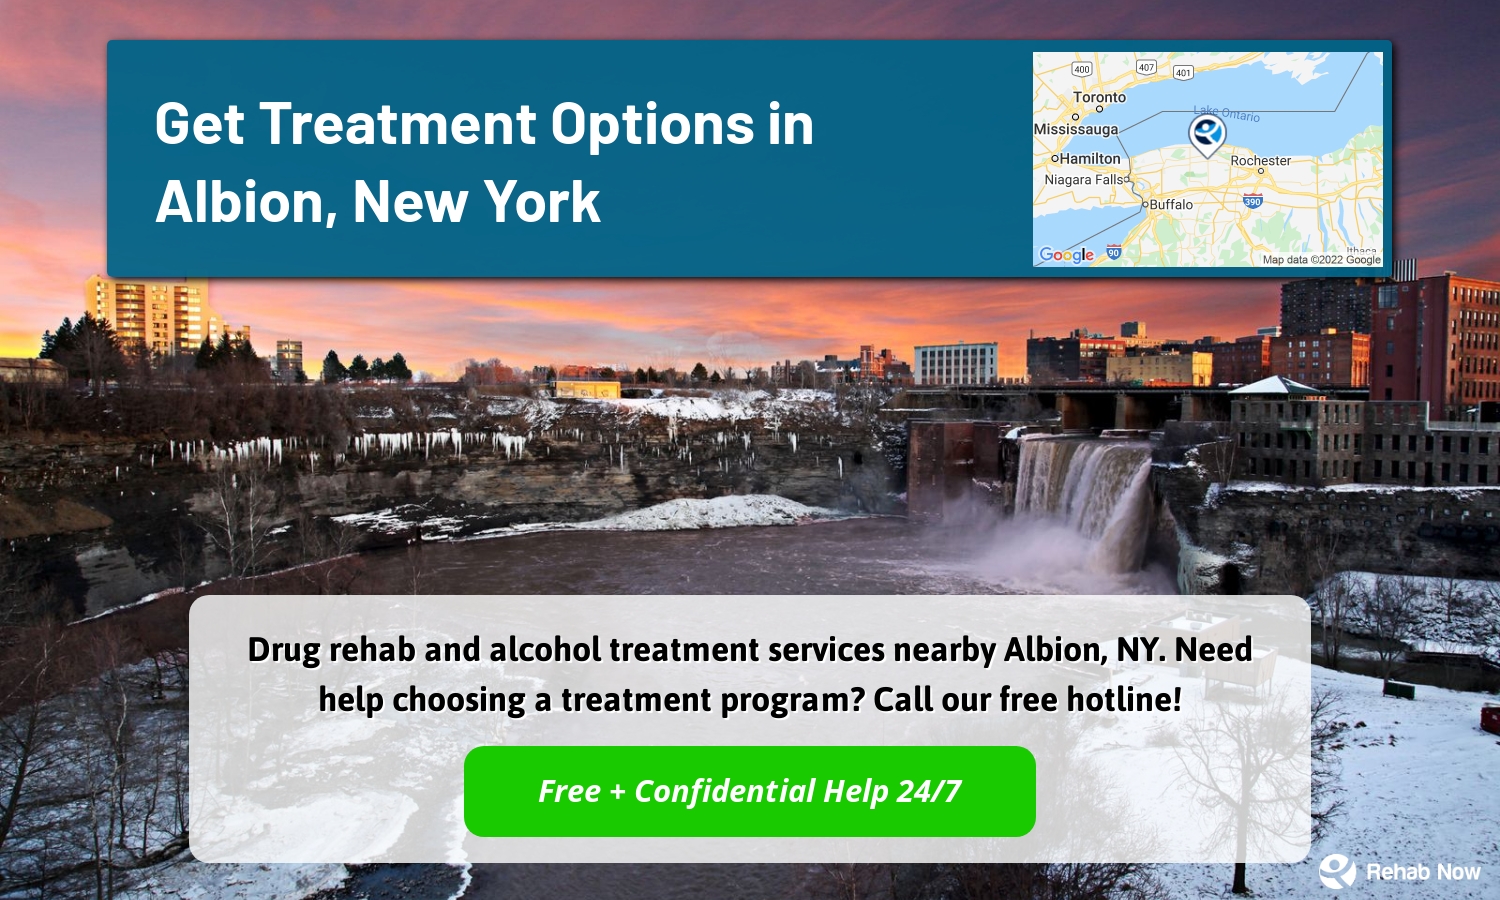 Drug rehab and alcohol treatment services nearby Albion, NY. Need help choosing a treatment program? Call our free hotline!